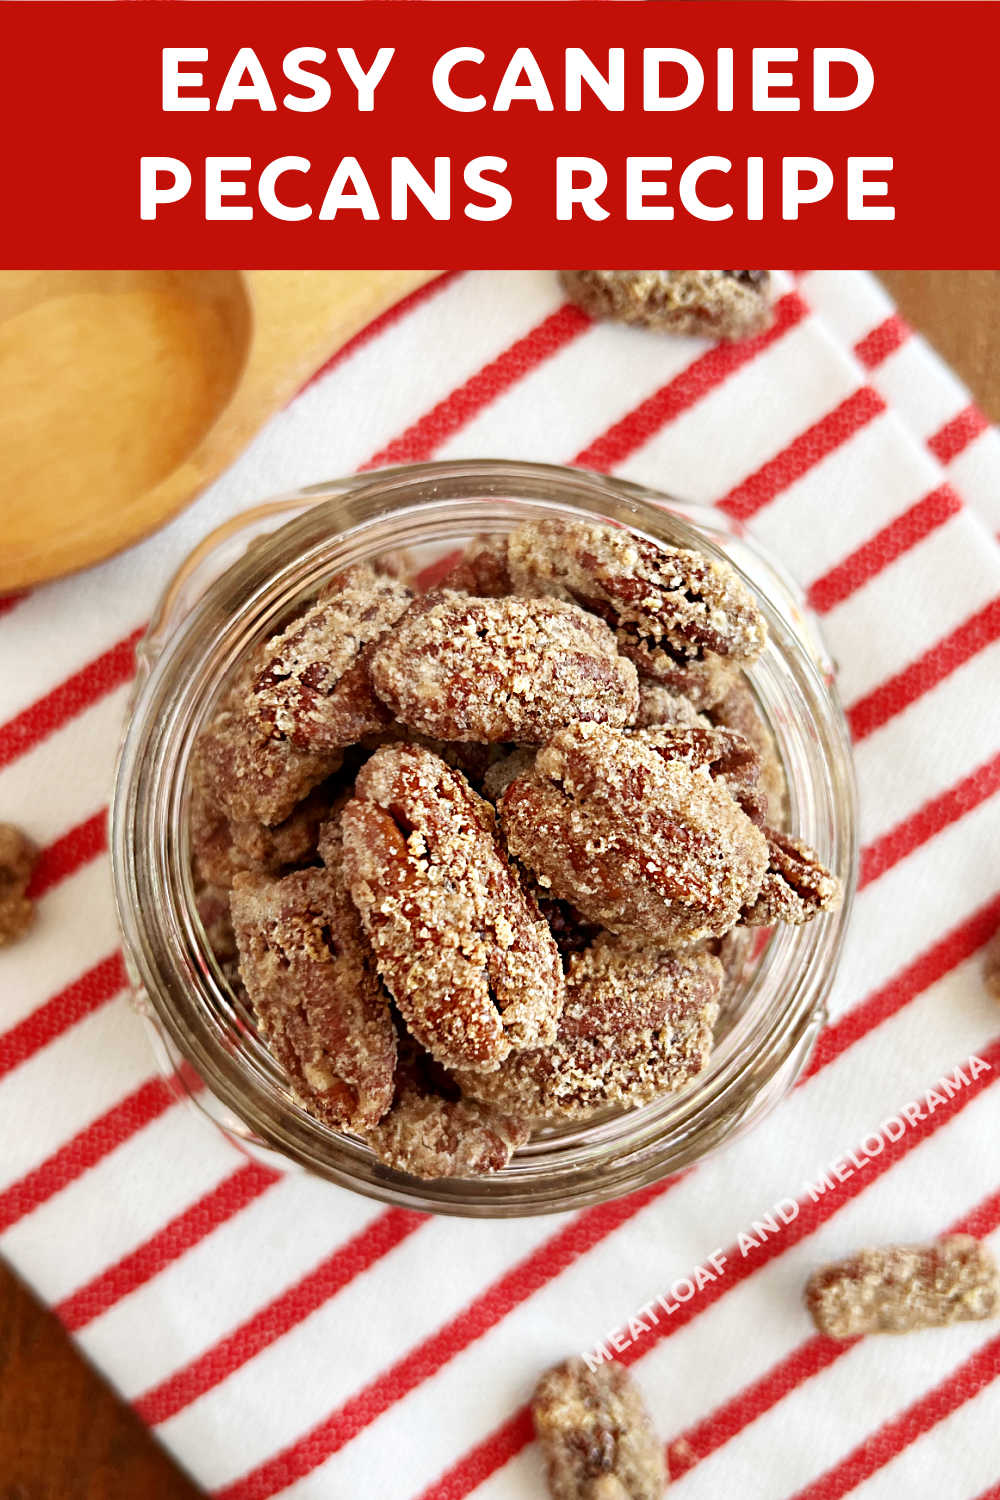 This easy candied pecans recipe makes delicious roasted cinnamon sugar pecans in just 20 minutes. Perfect for snacks, holiday gifts, or in salads and desserts. You'll want to make this easy recipe throughout the holiday season! via @meamel